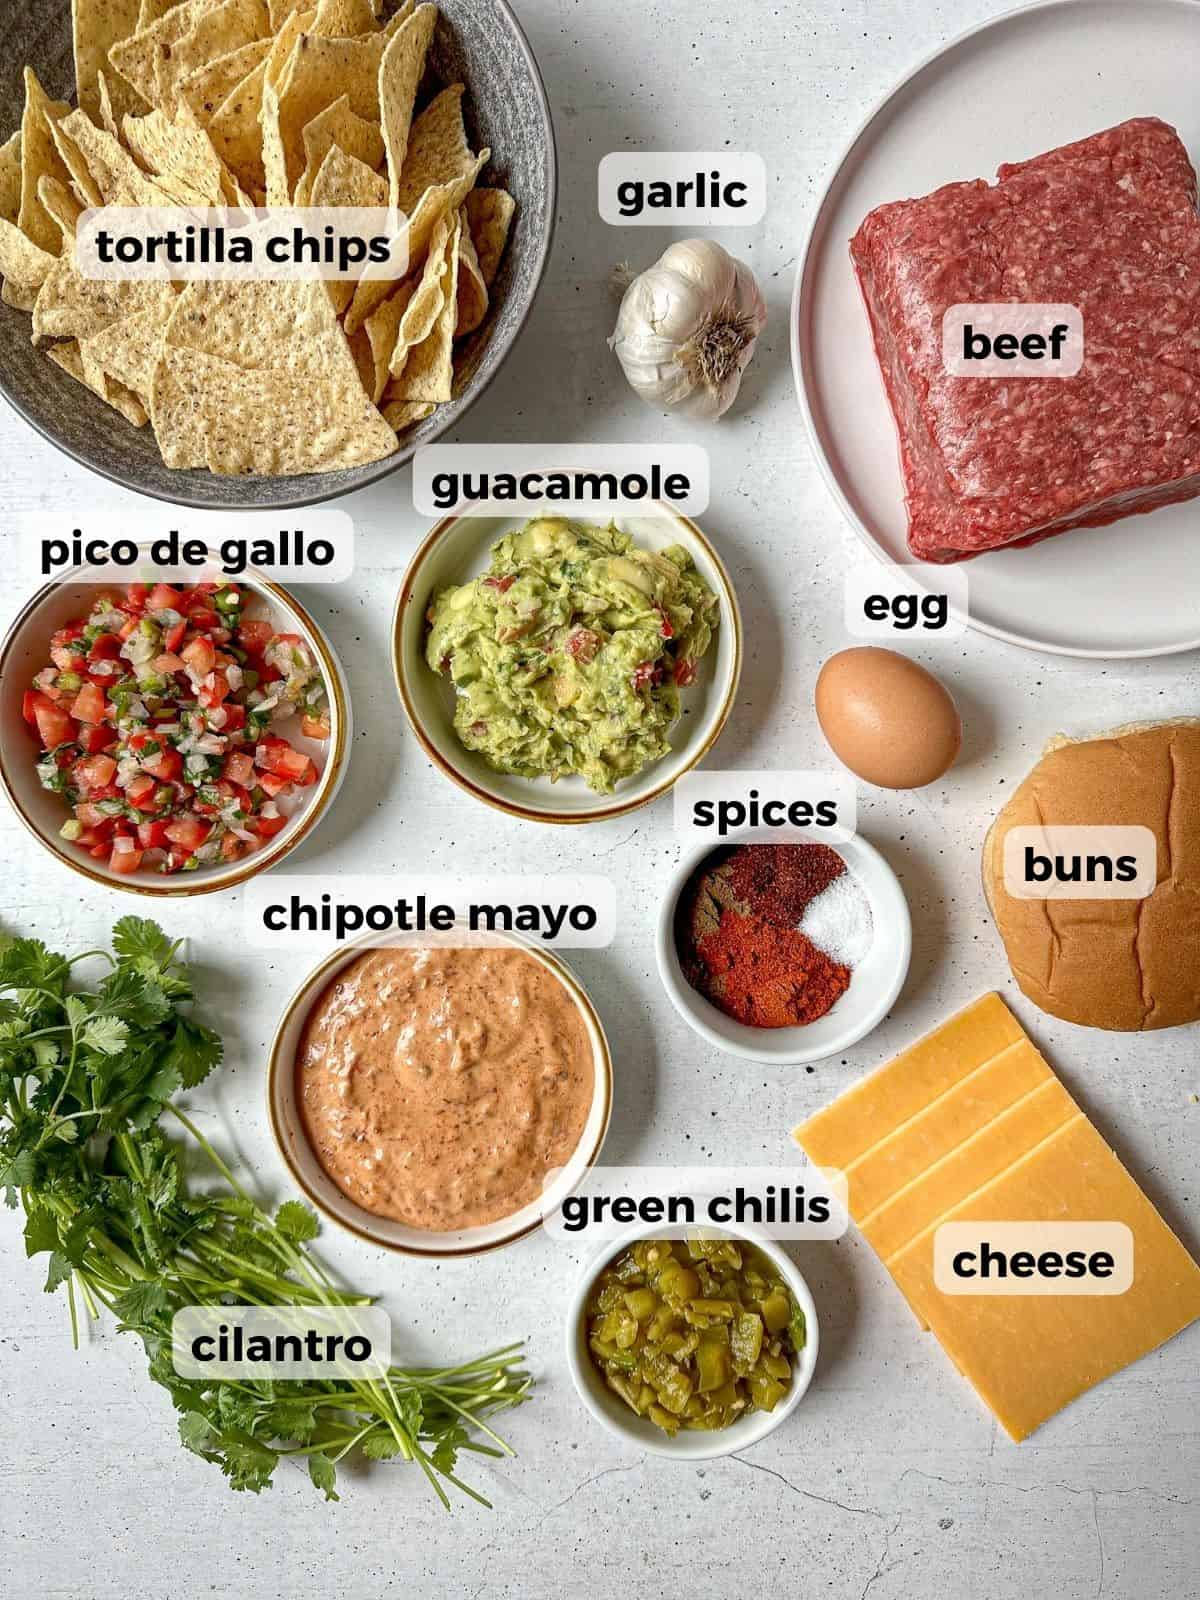 Ingredients needed to make southwest burgers on a concrete table: ground beef, hamburger bun, egg, cheese, green chilis, cilantro, spices, pico de gallo, guacamole, chipotle mayo, garlic, and tortilla chips.